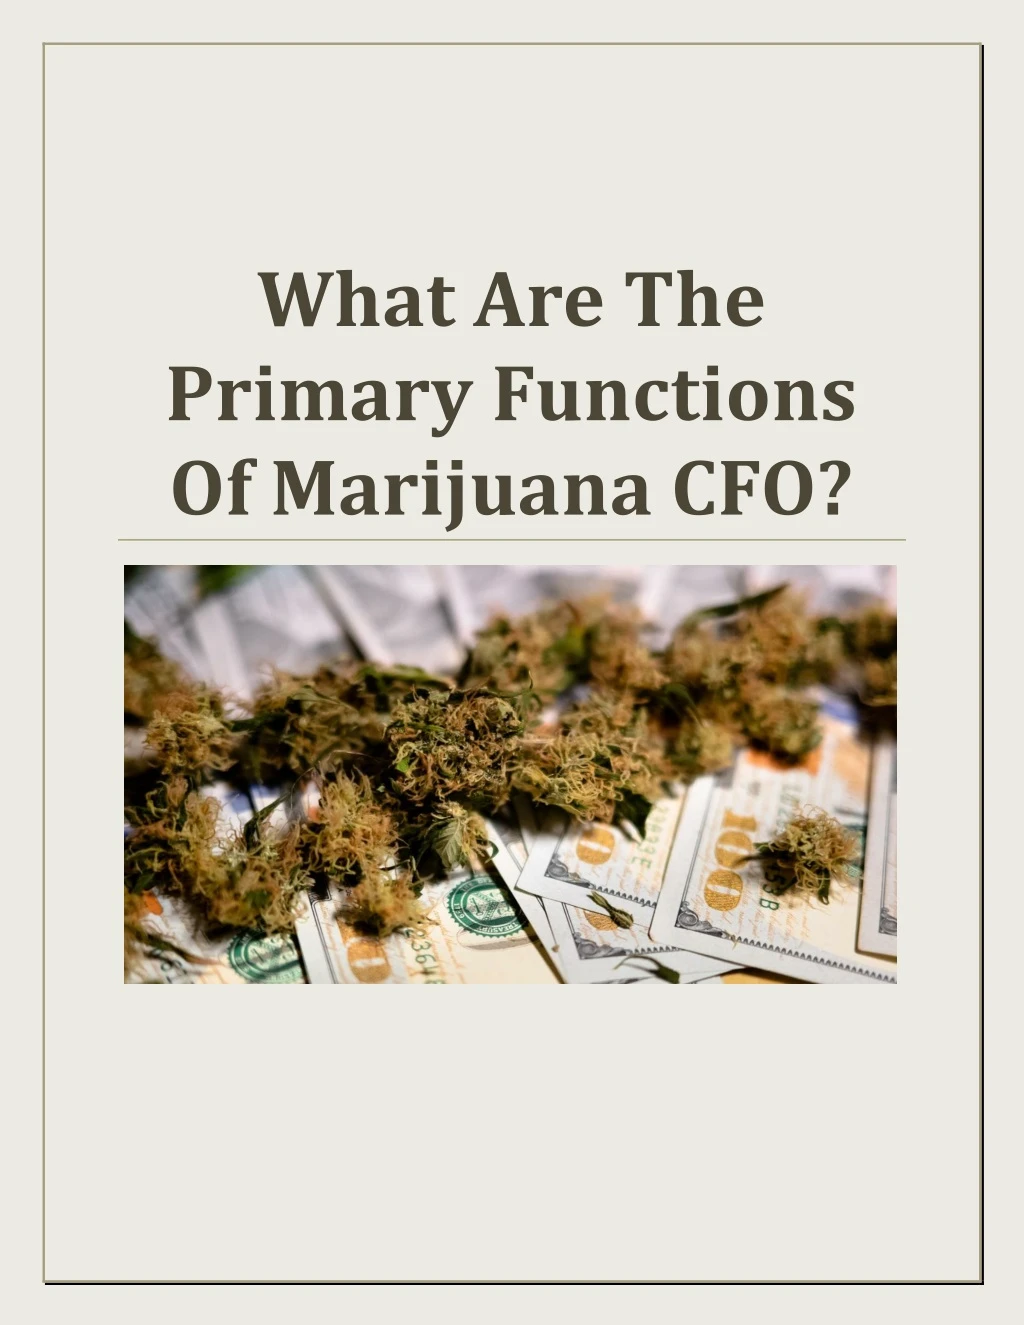 what are the primary functions of marijuana cfo